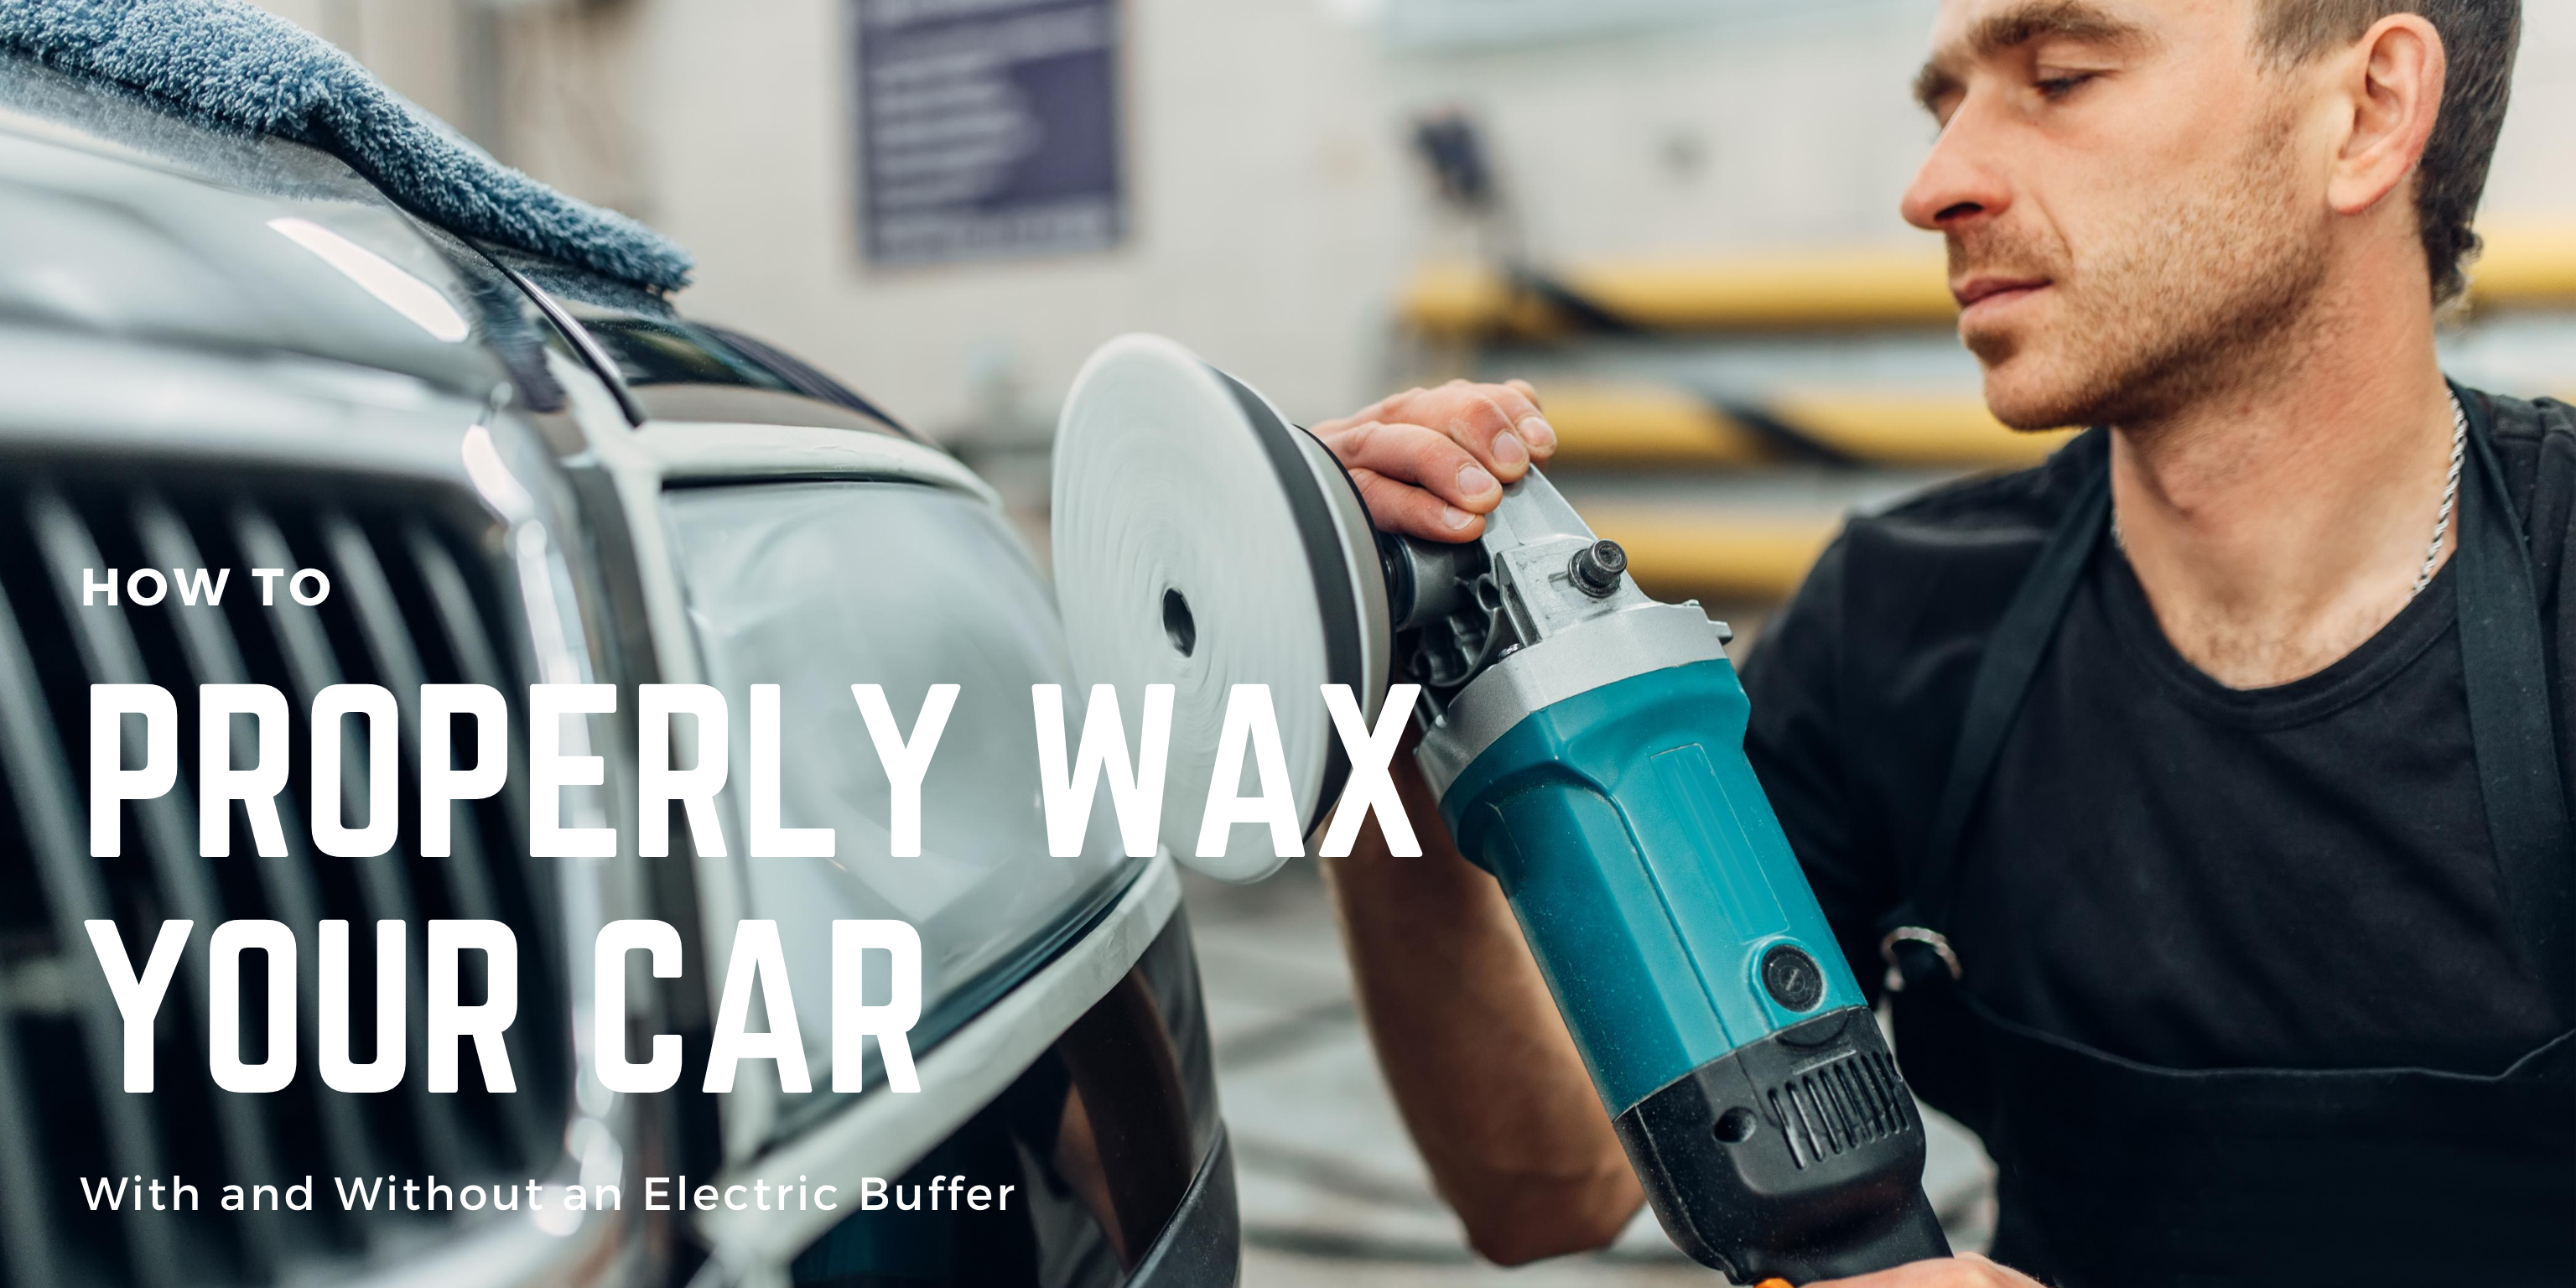 Do You Know How to Properly Wax a Car With and Without an Electric Buffer?